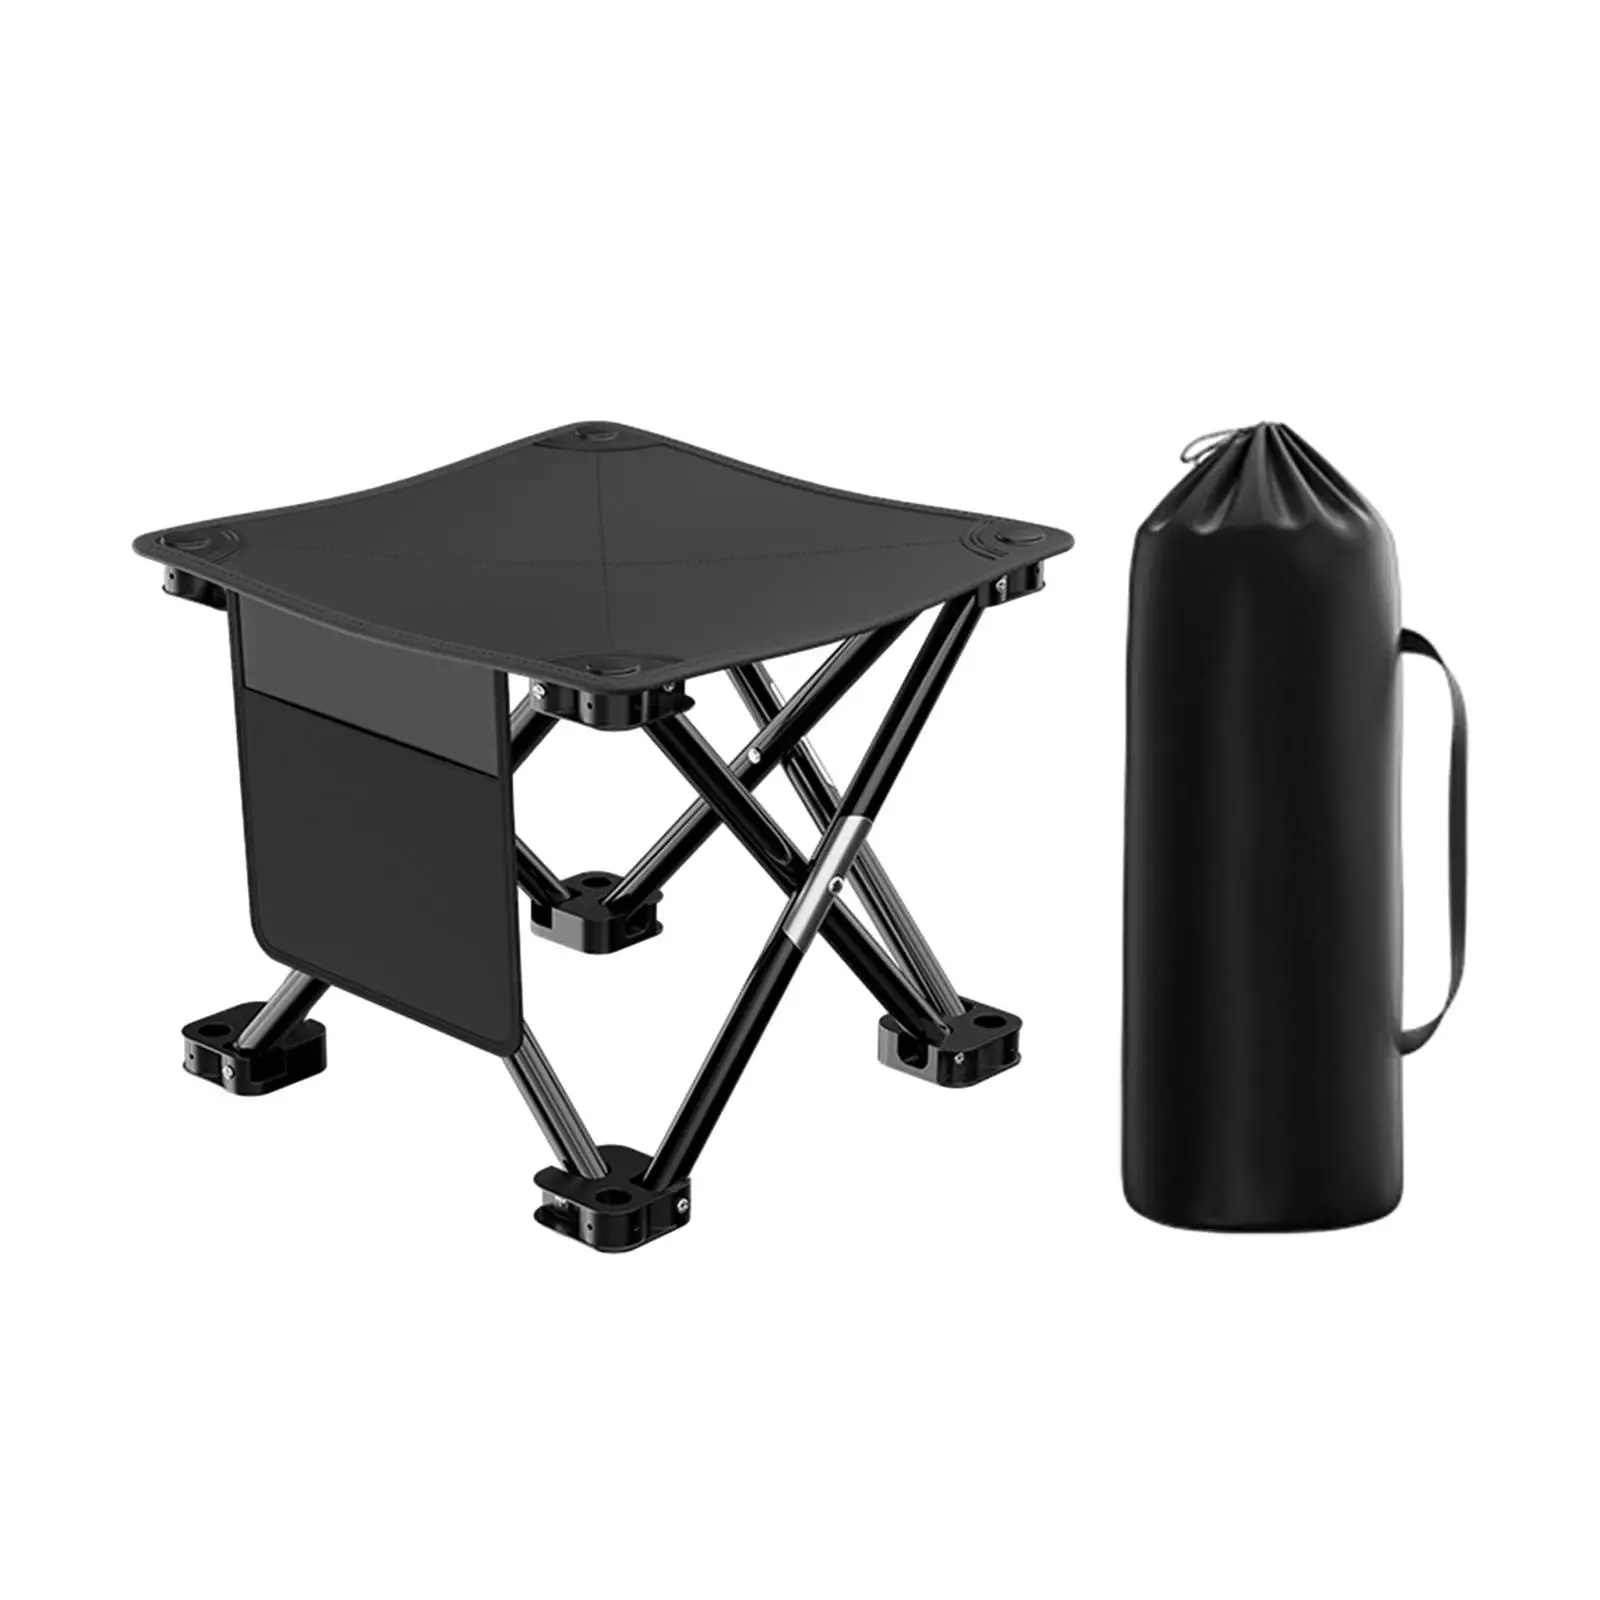 Camping Folding Stool Folding Chair with Side Pocket Collapsible Stool Saddle Chair for Patio Outdoor Hiking Concert Festival